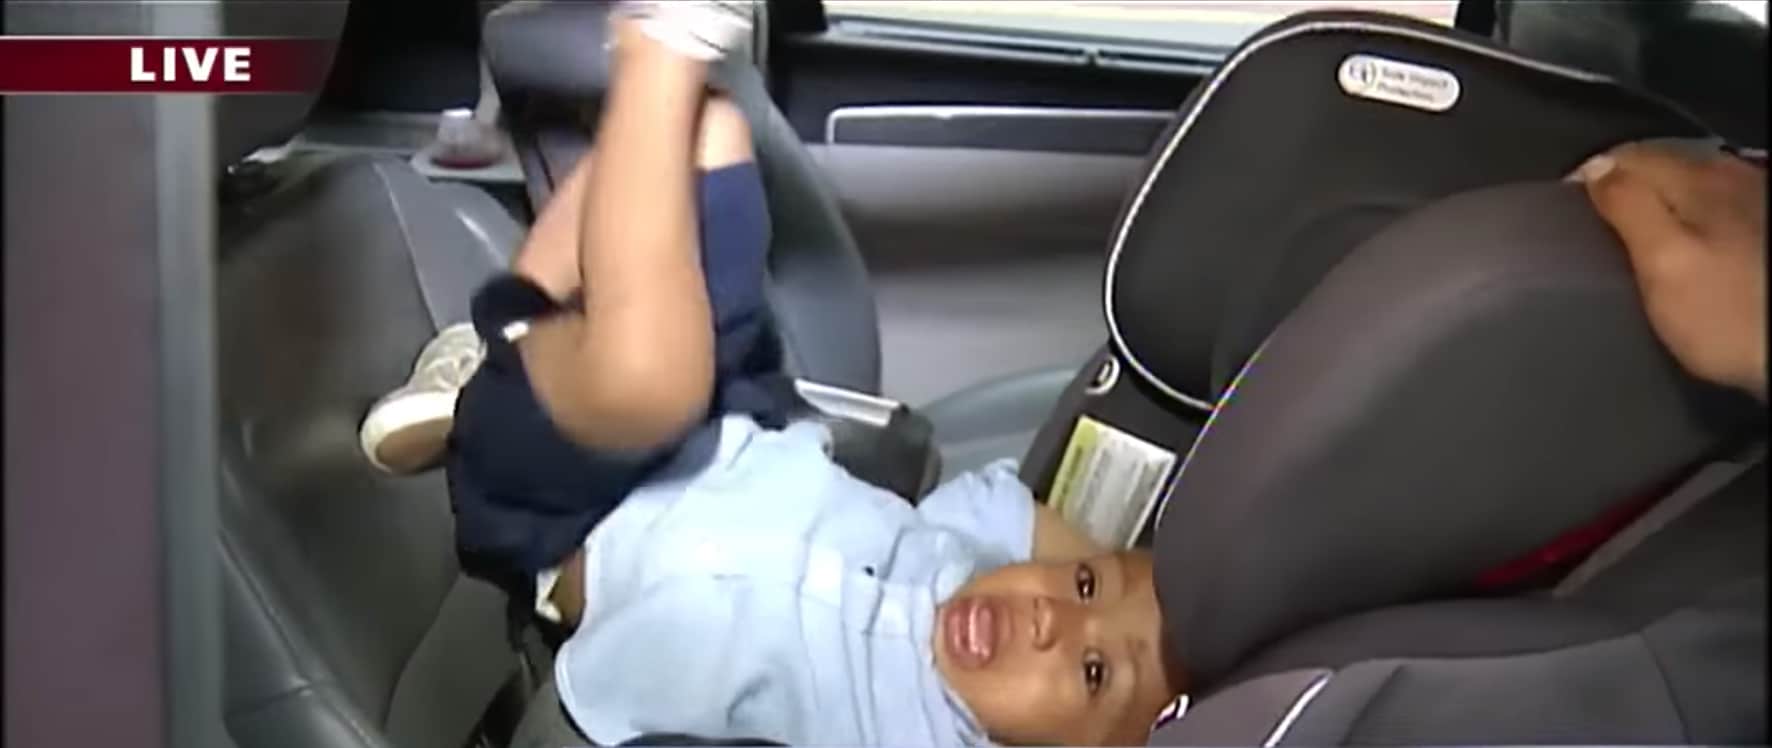 This Is How NOT to Demo a Car Seat (Hint: It Involves Using a Real Toddler)